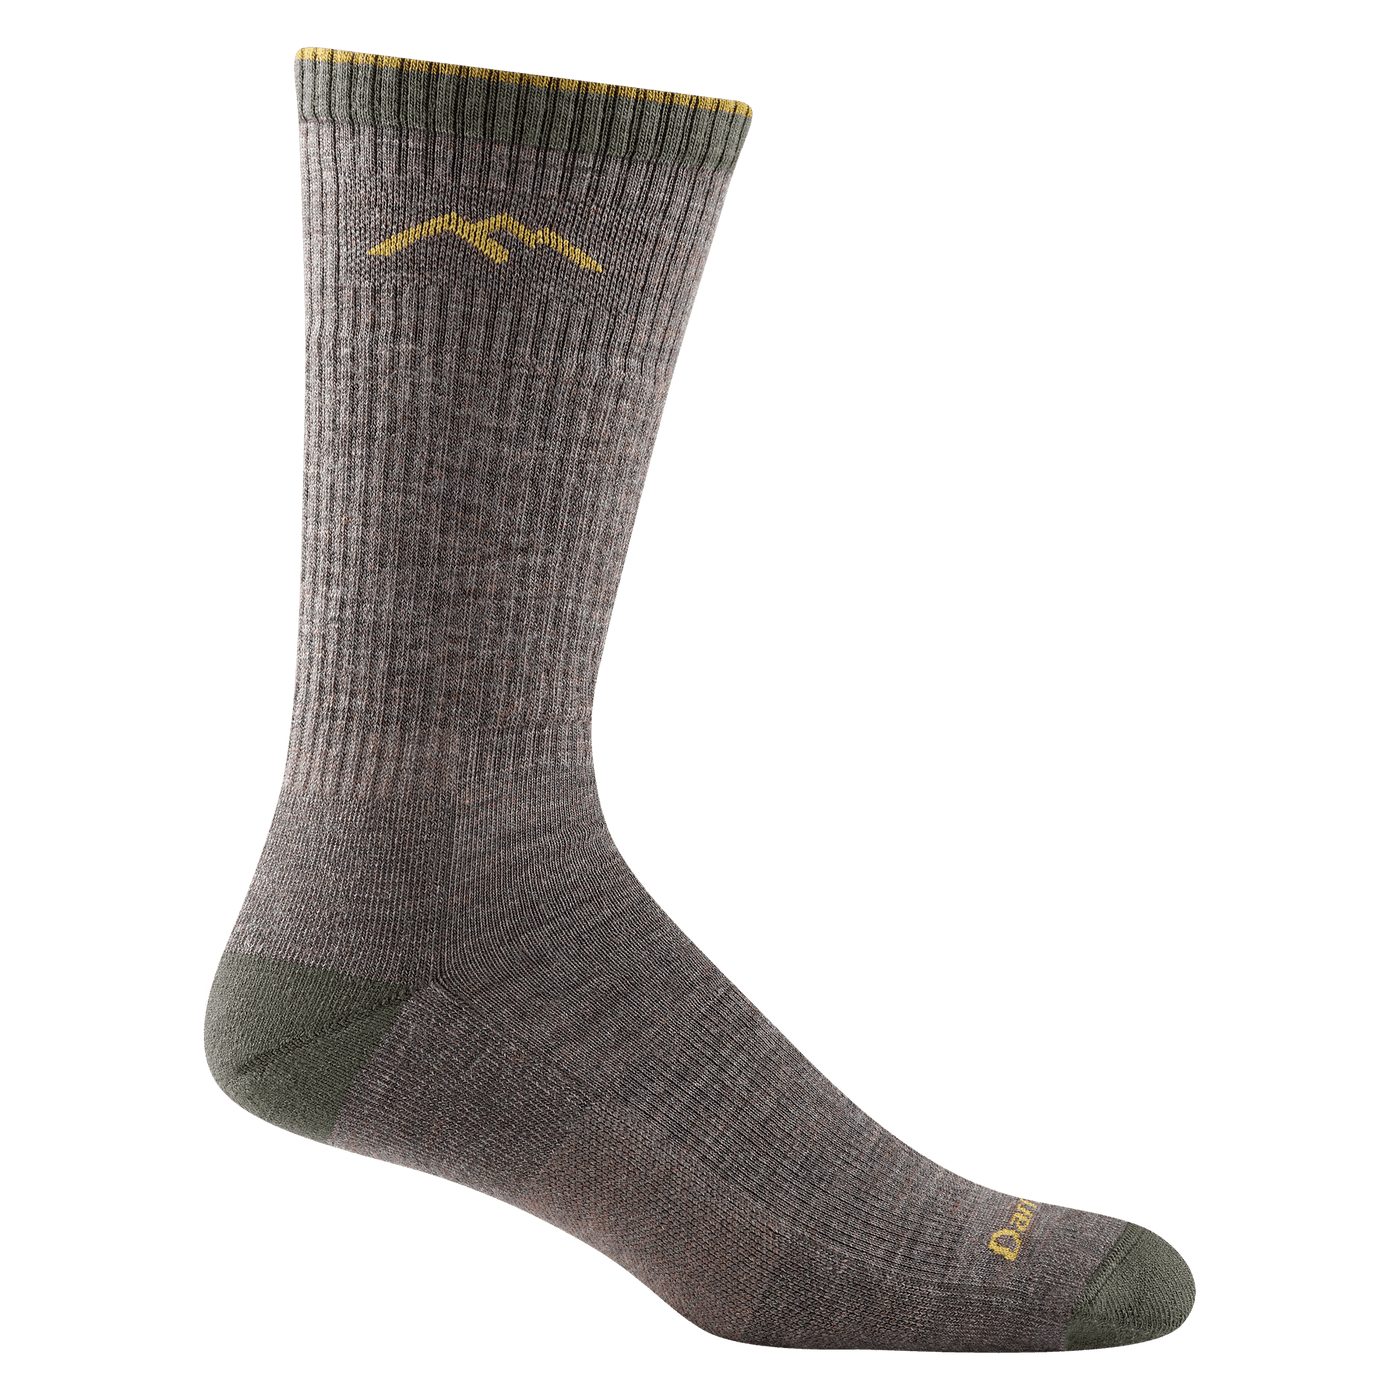 Hiker Midweight with Cushion, Men's Boot #1403 - Darn Tough - The Sock Monster